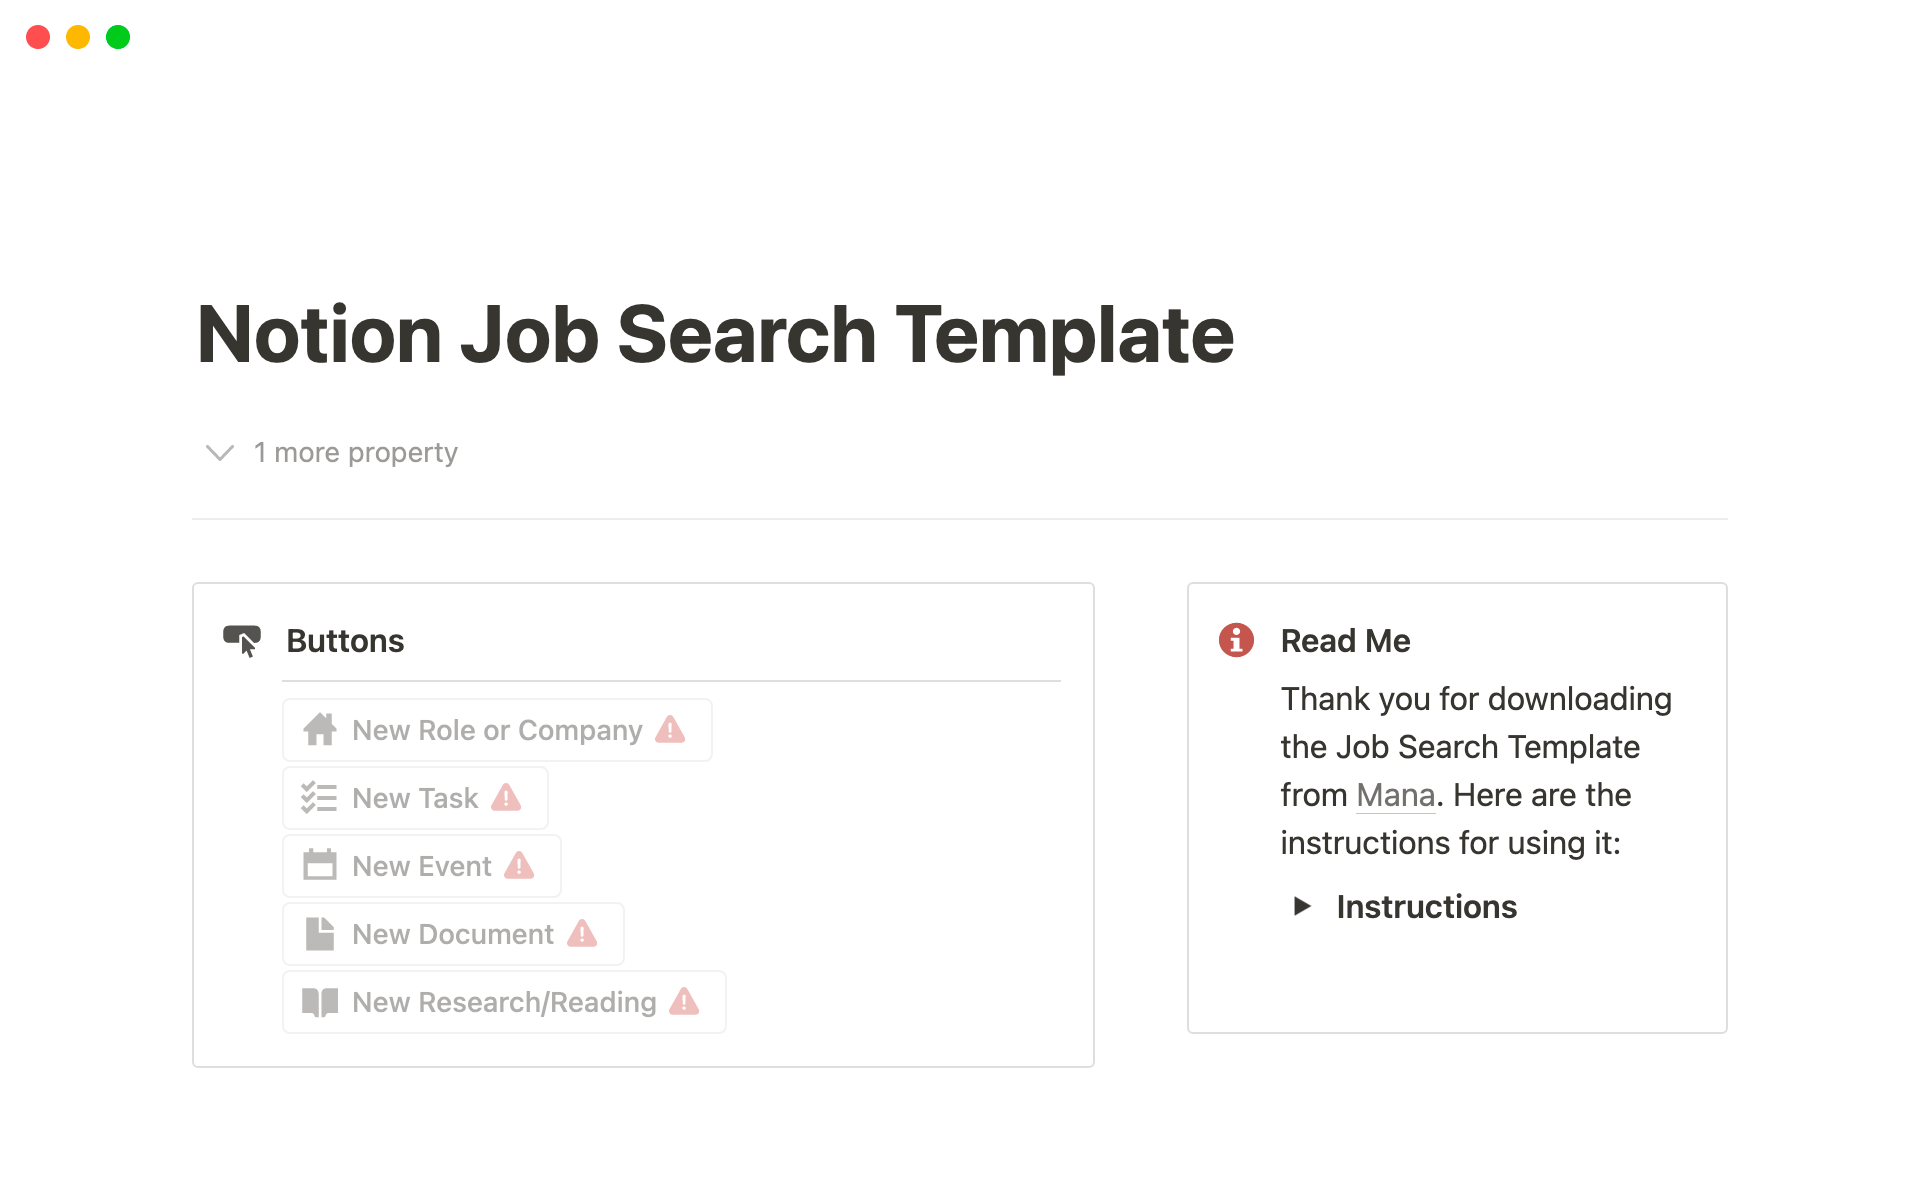 Find your dream job faster thanks to this all-in-one template.